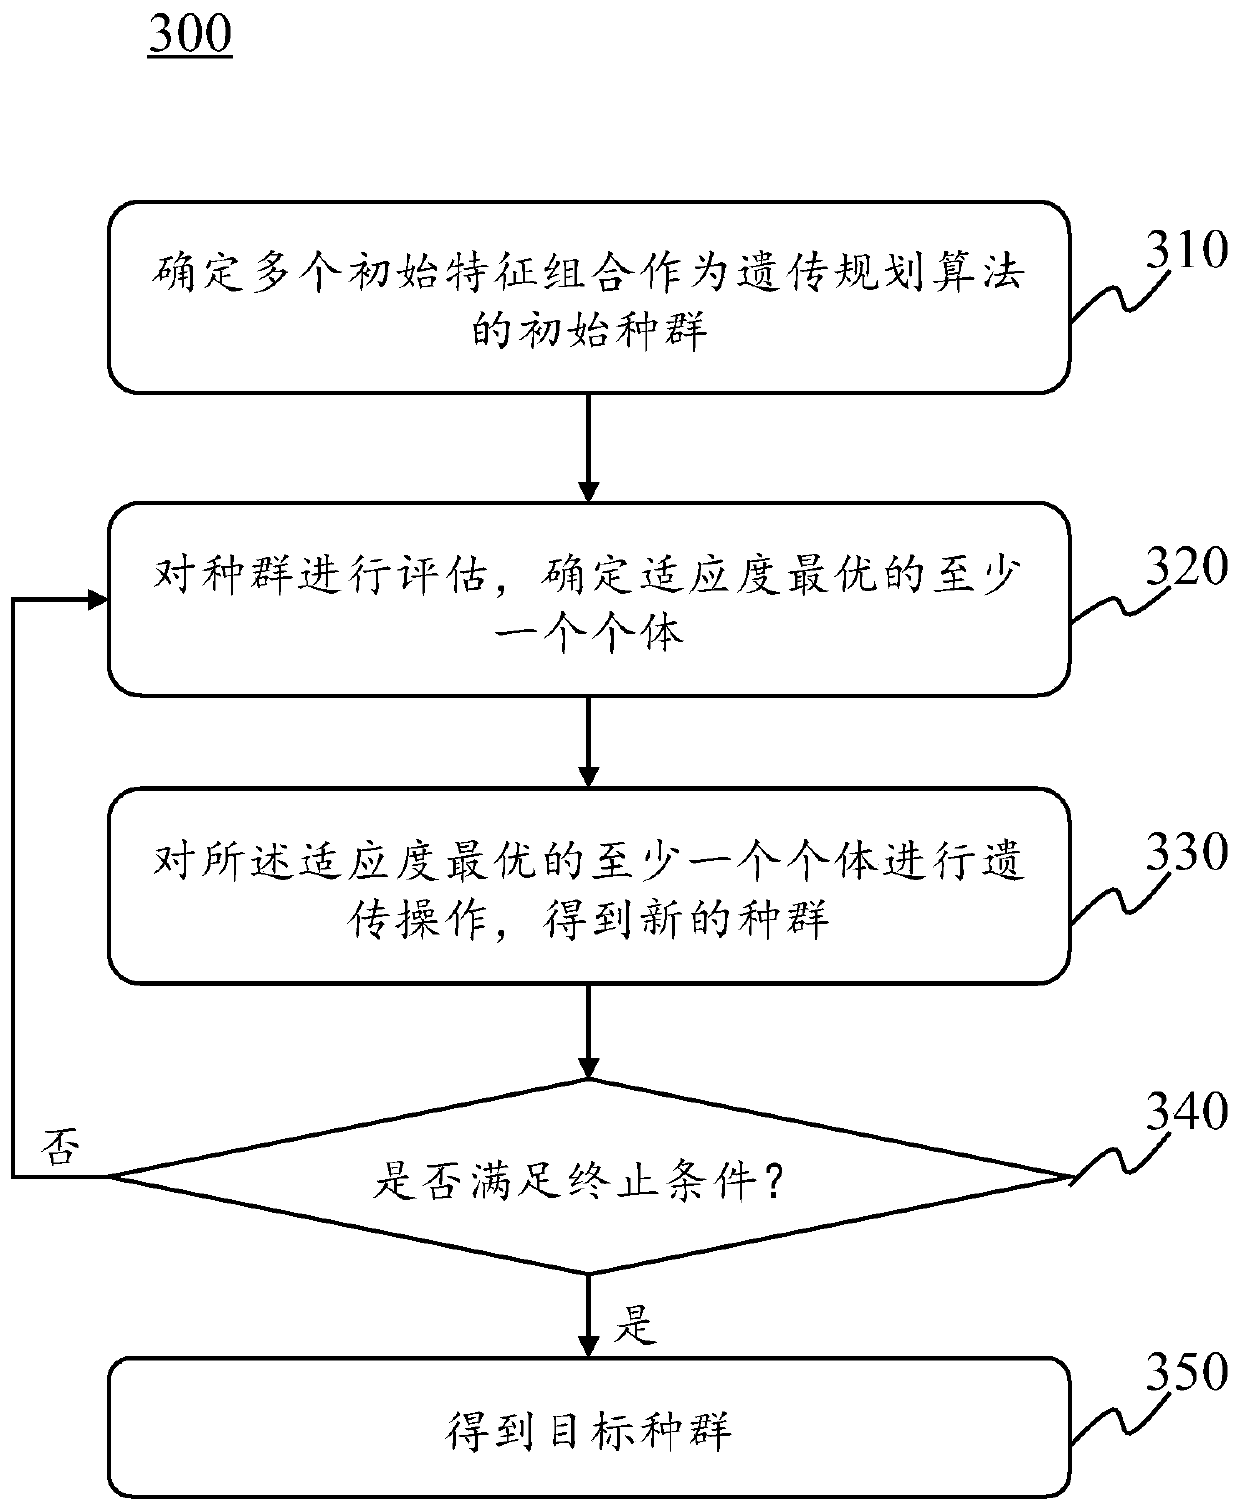 Feature processing method and system for machine learning